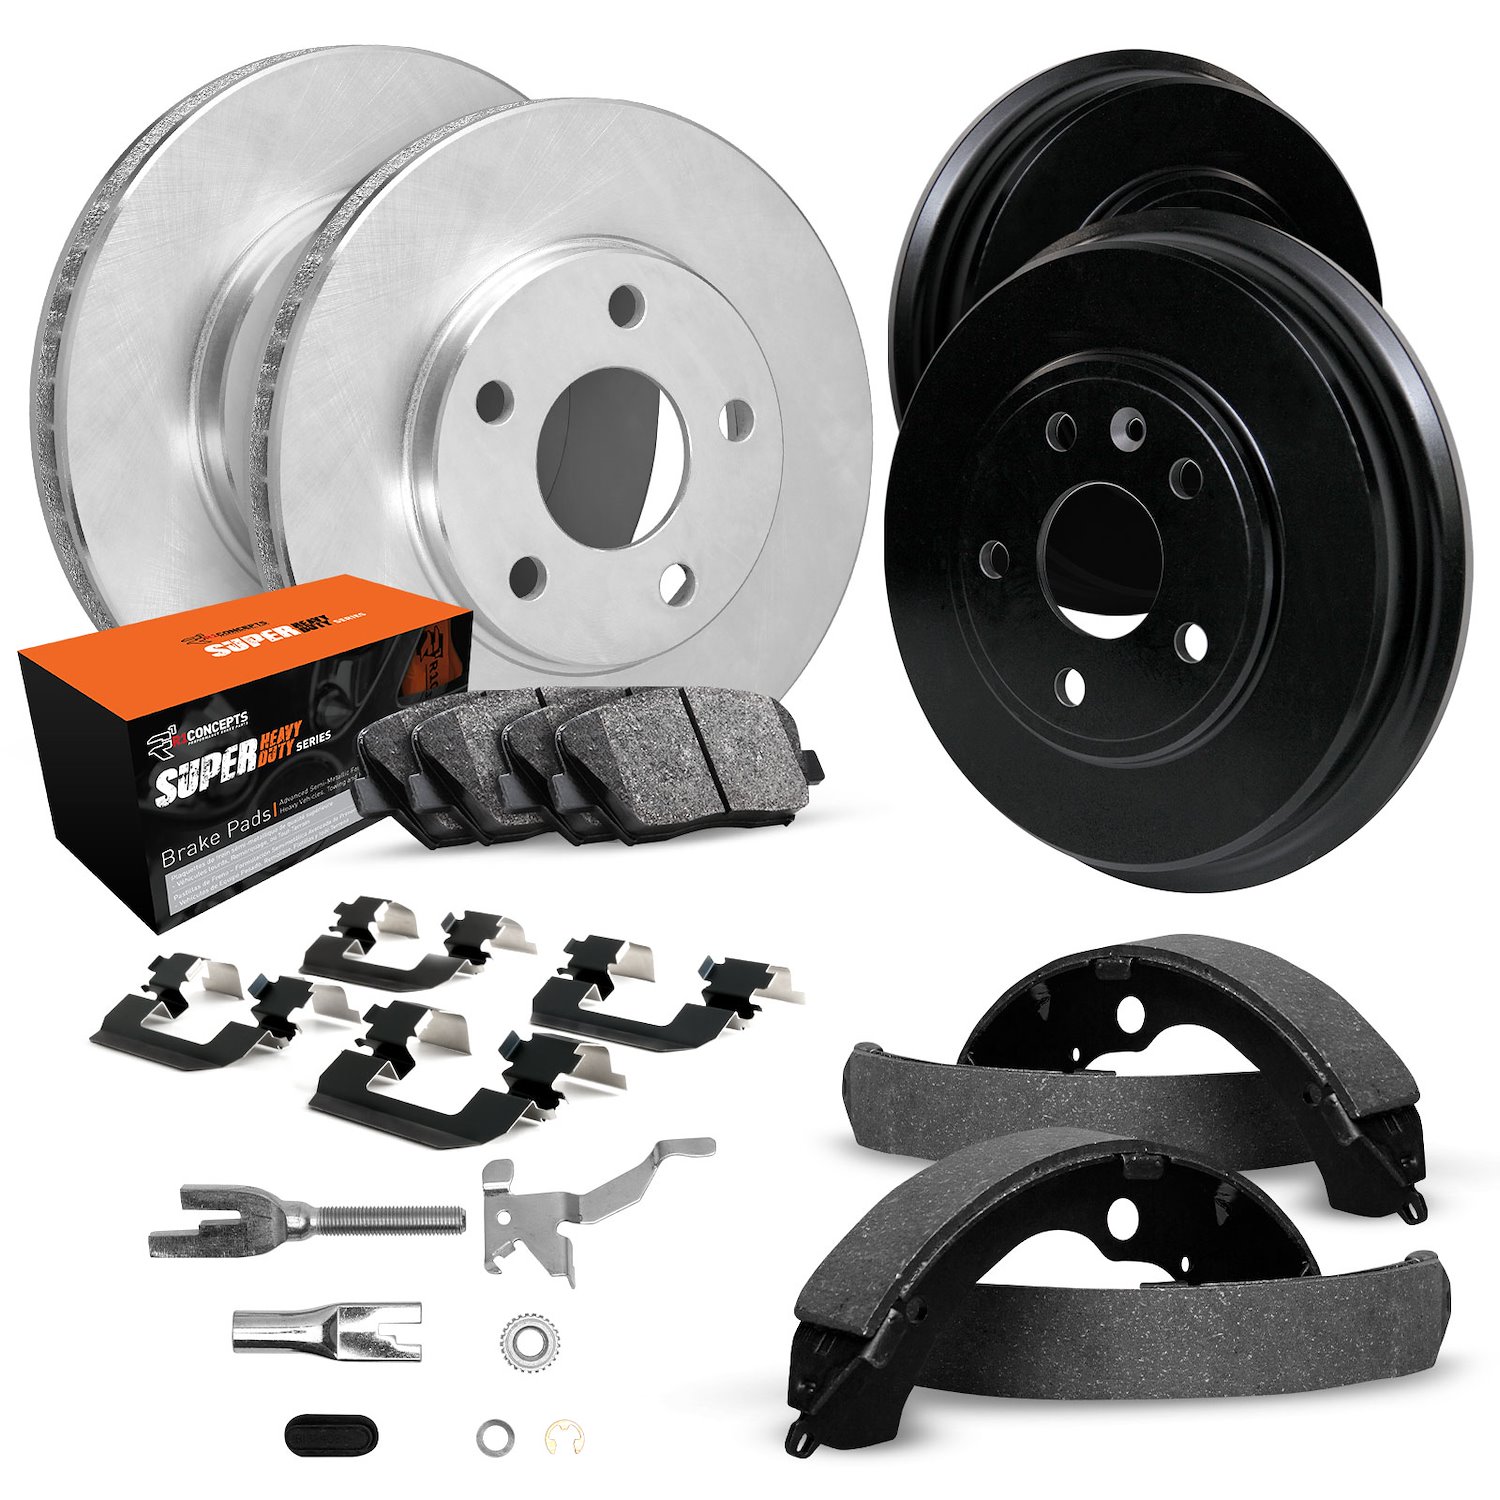 E-Line Blank Brake Rotor & Drum Set w/Super-Duty Pads, Shoes, Hardware, & Adjusters, 1998-2000 GM, Position: Front & Rear